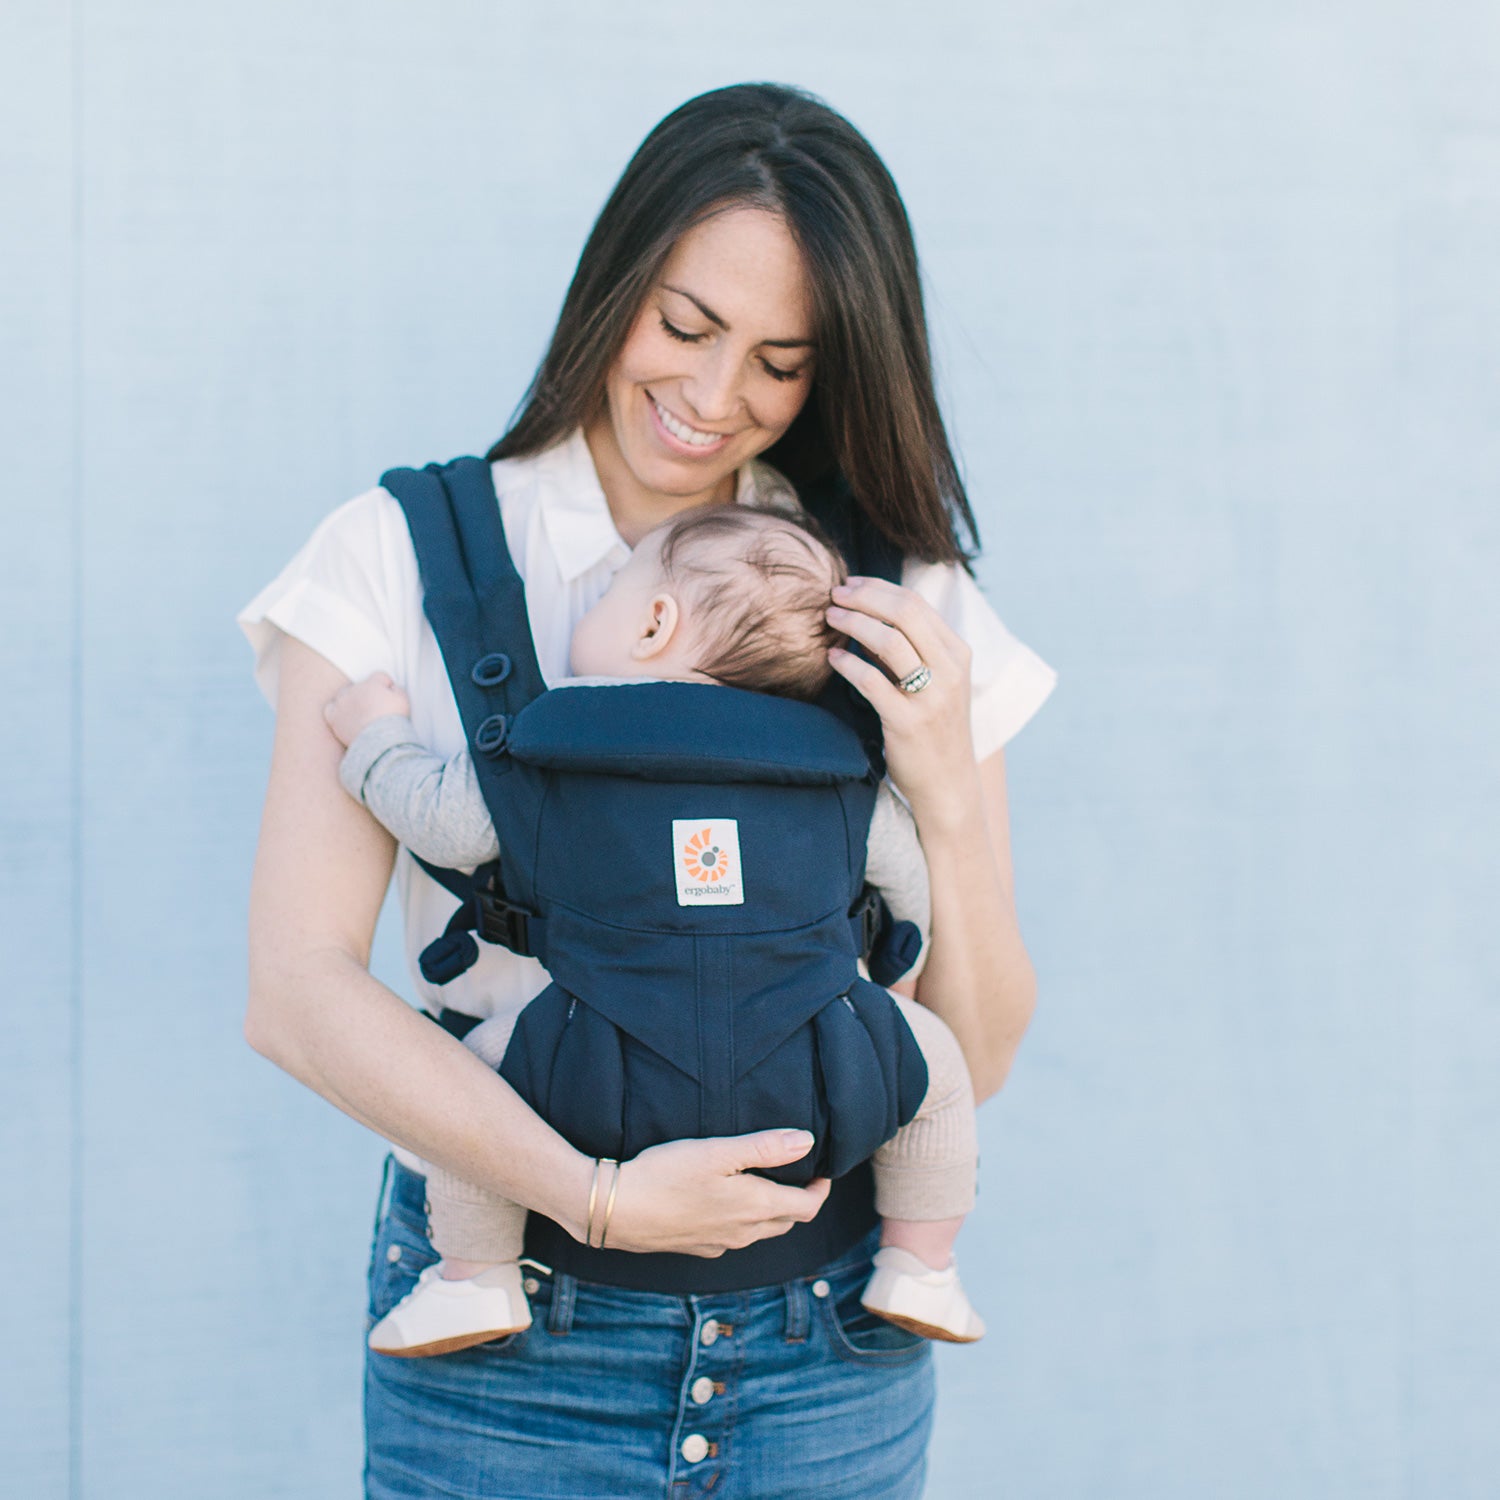 ergo baby carrier which one is best